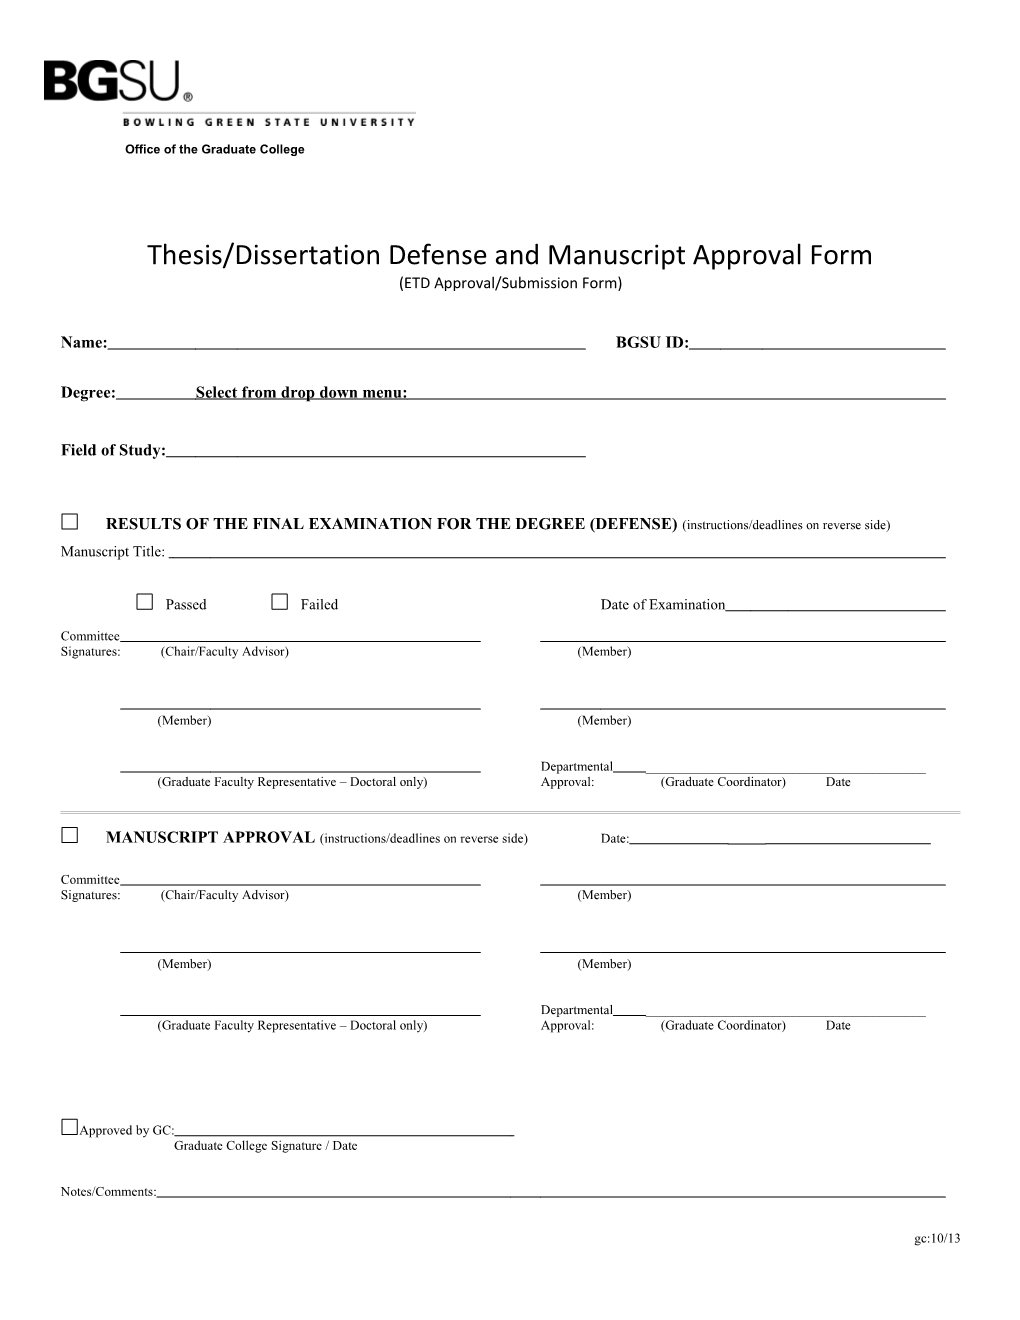 ETD Approval/Submission Form